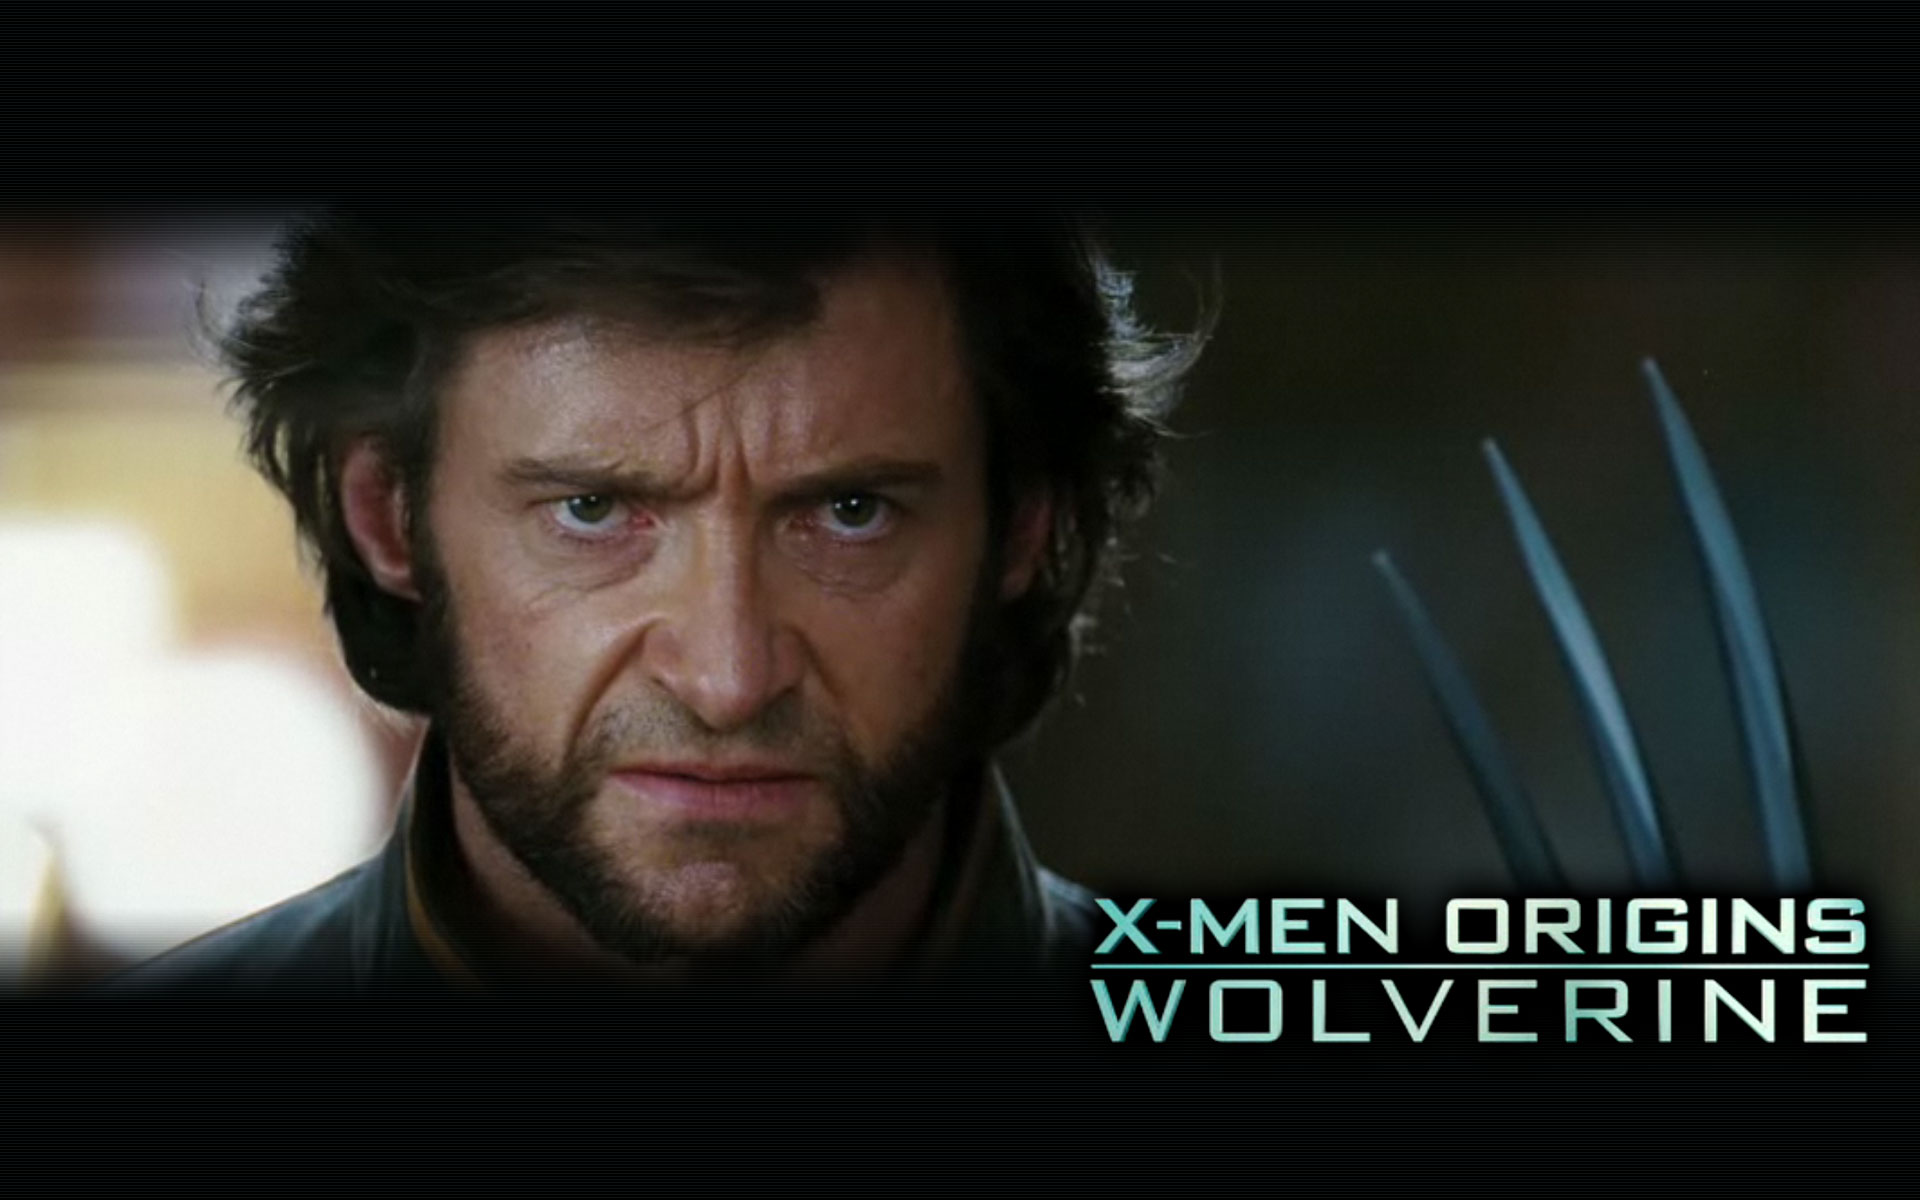 wolverine wallpaper,movie,action film,nose,forehead,facial hair